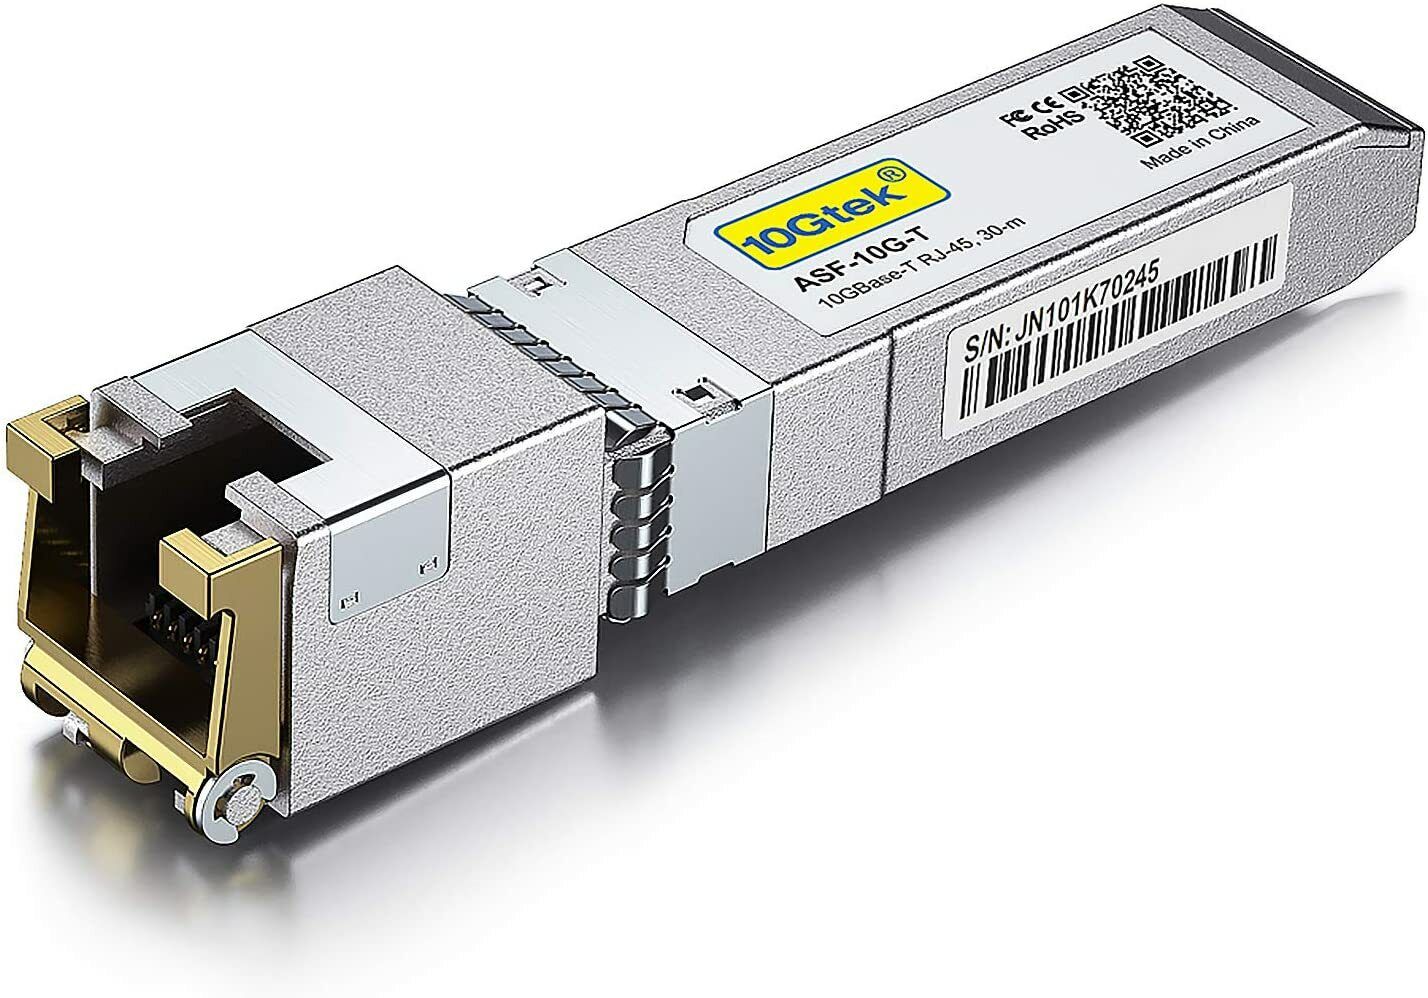 For HPP, HP Aruba 10GBase-T 10G SFP+ Transceiver RJ-45 to SFP up to 30 Meter